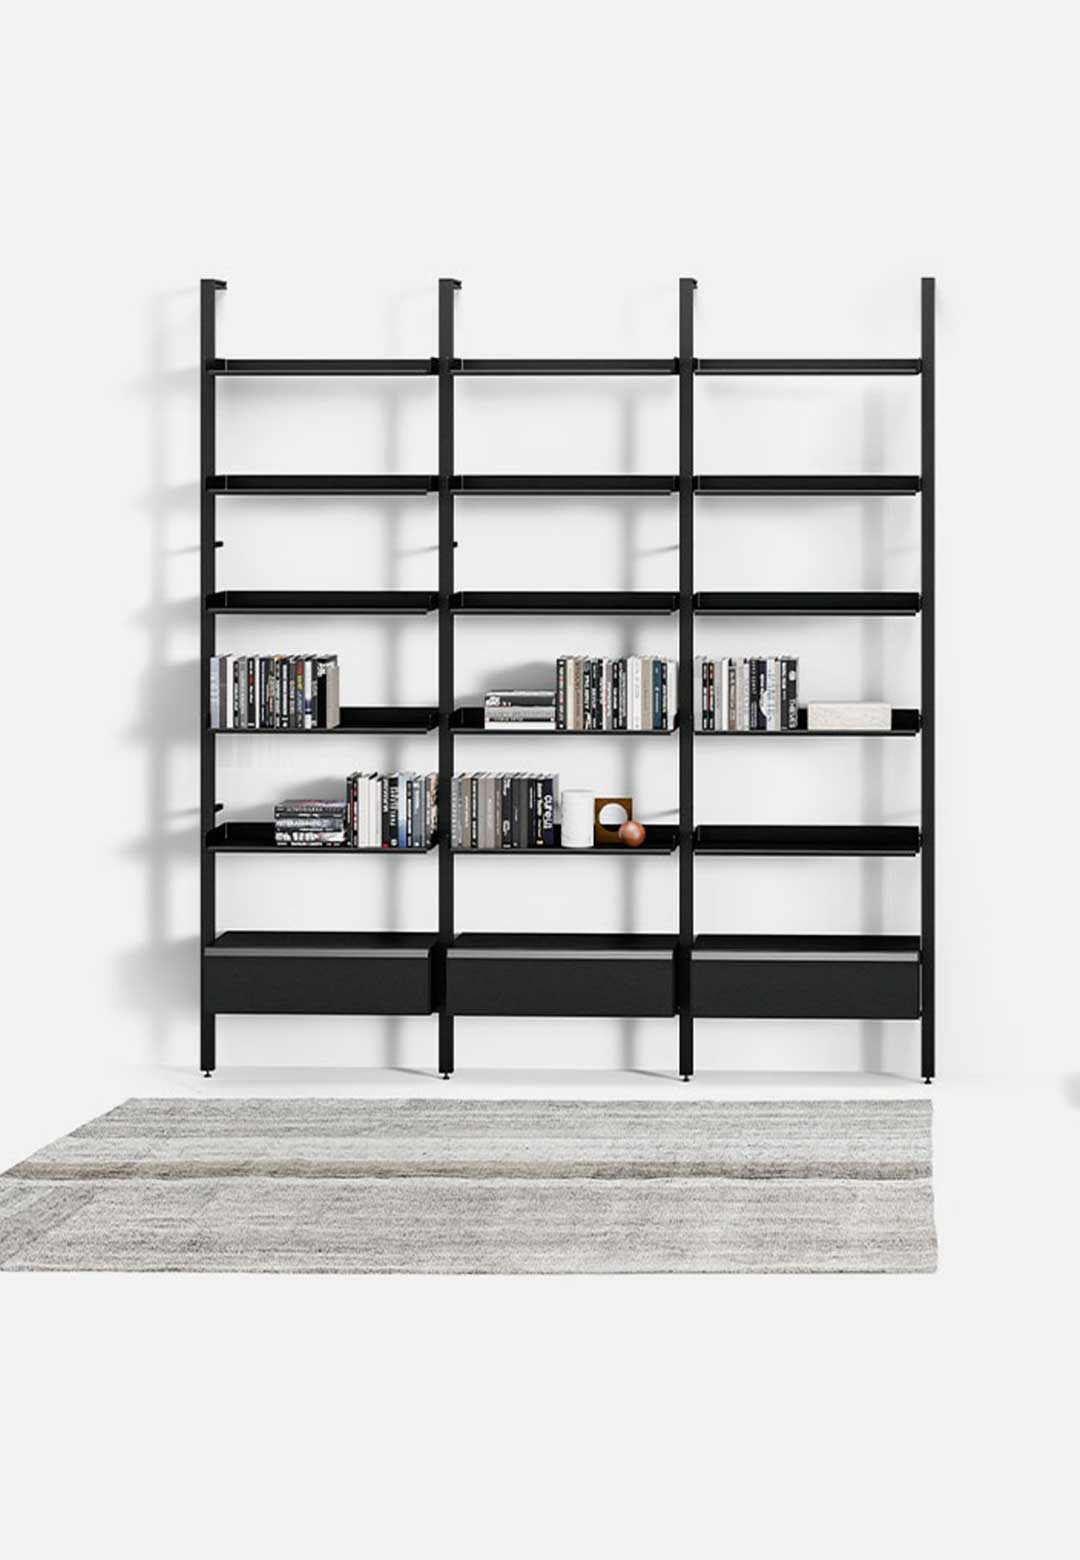 De Padova plays with elemental shapes for Wigmore Shelving System